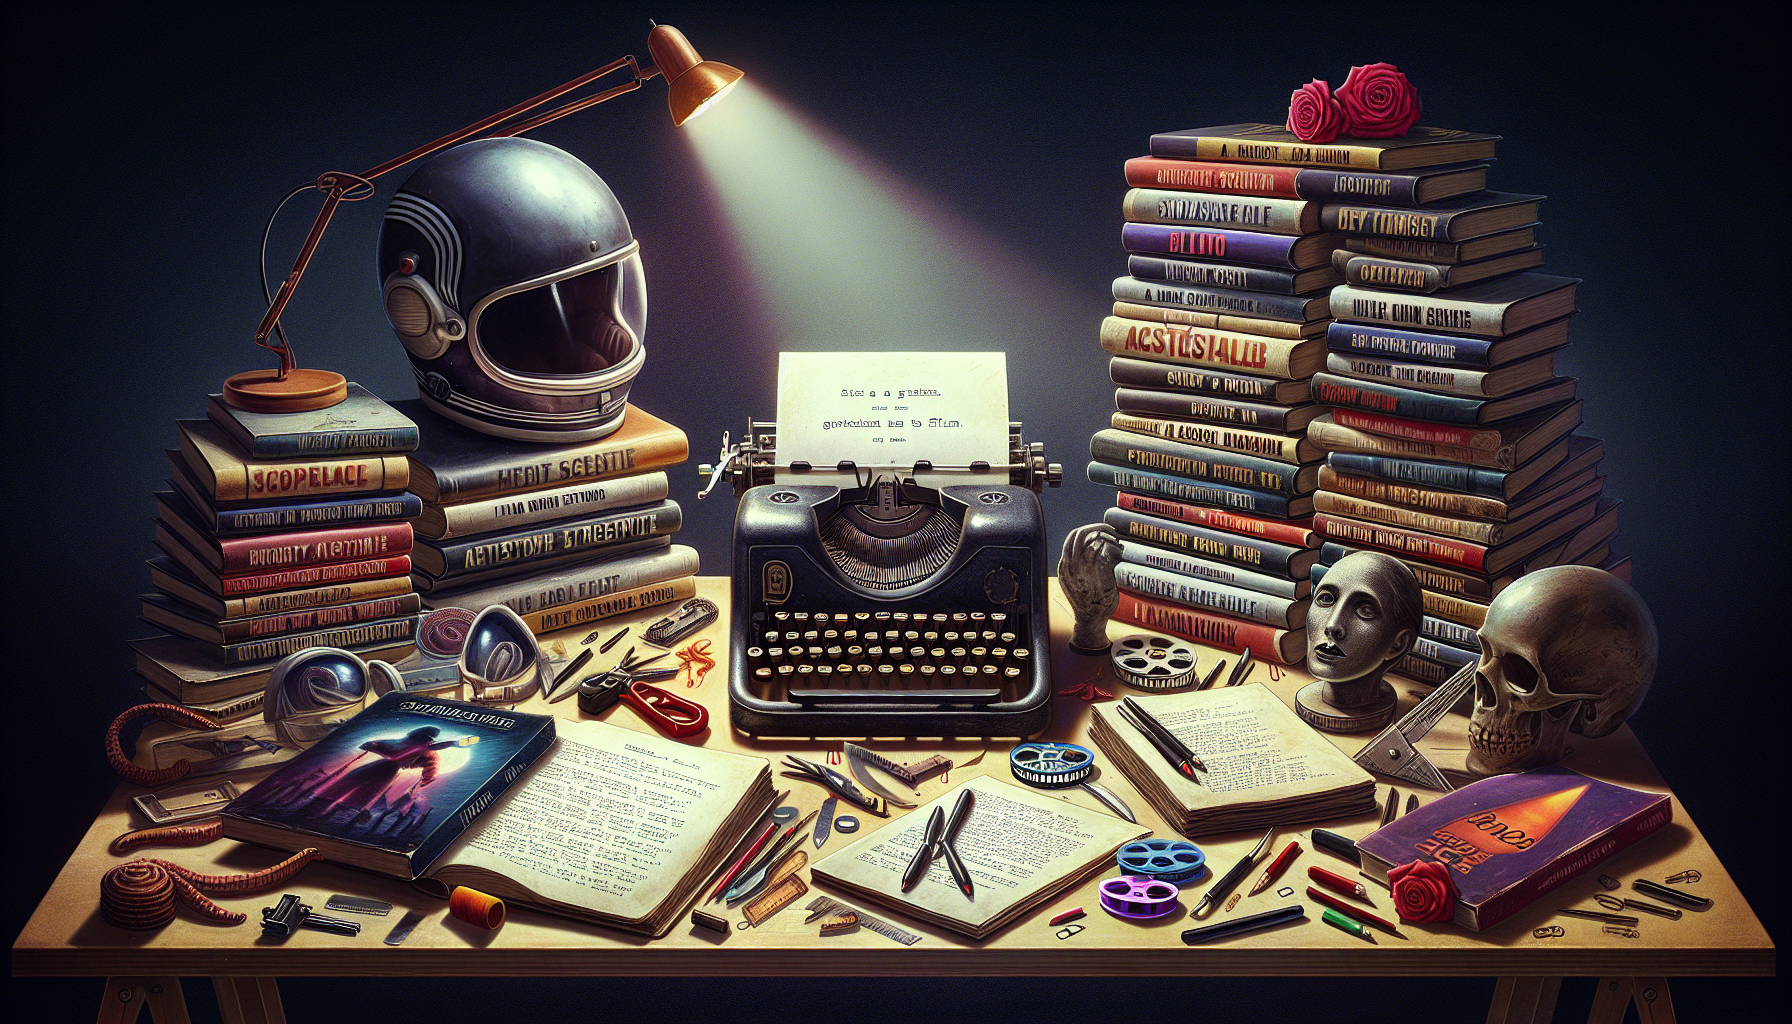 An artist's desk with a vintage typewriter, stacks of screenplay scripts in various genres like horror, sci-fi, romance, and comedy, surrounded by iconic movie props from each genre, like a spacesuit